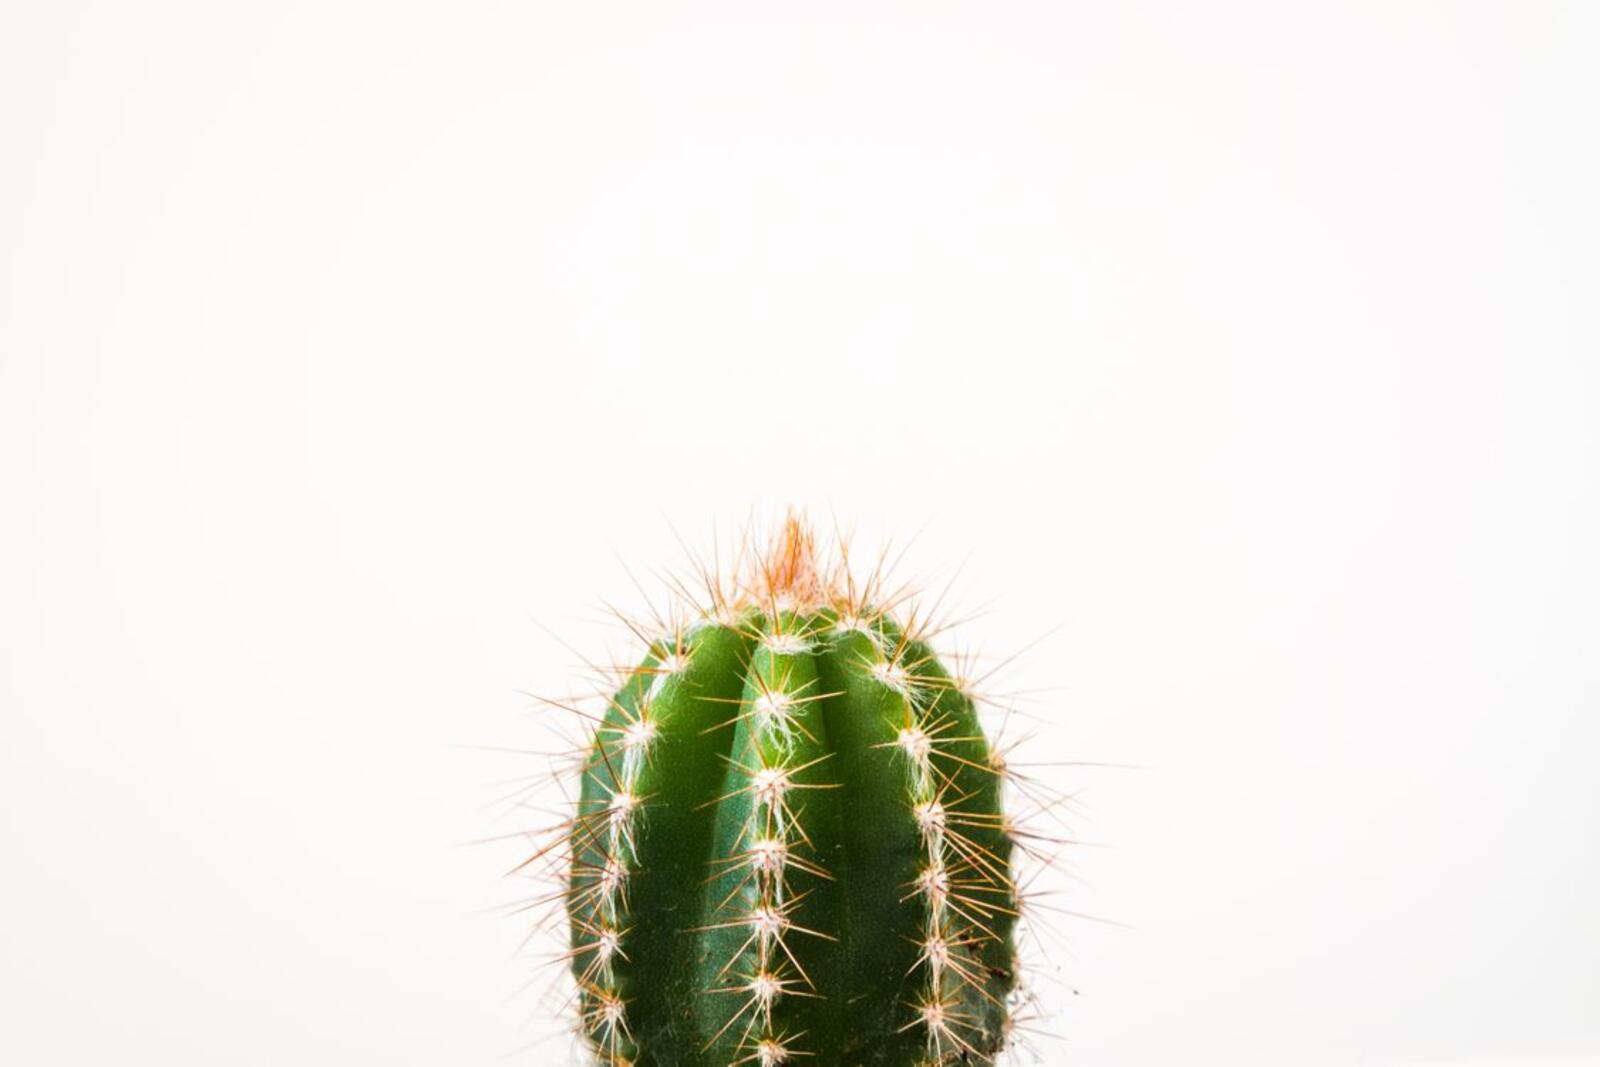 Wallpapers plant green cactus on the desktop